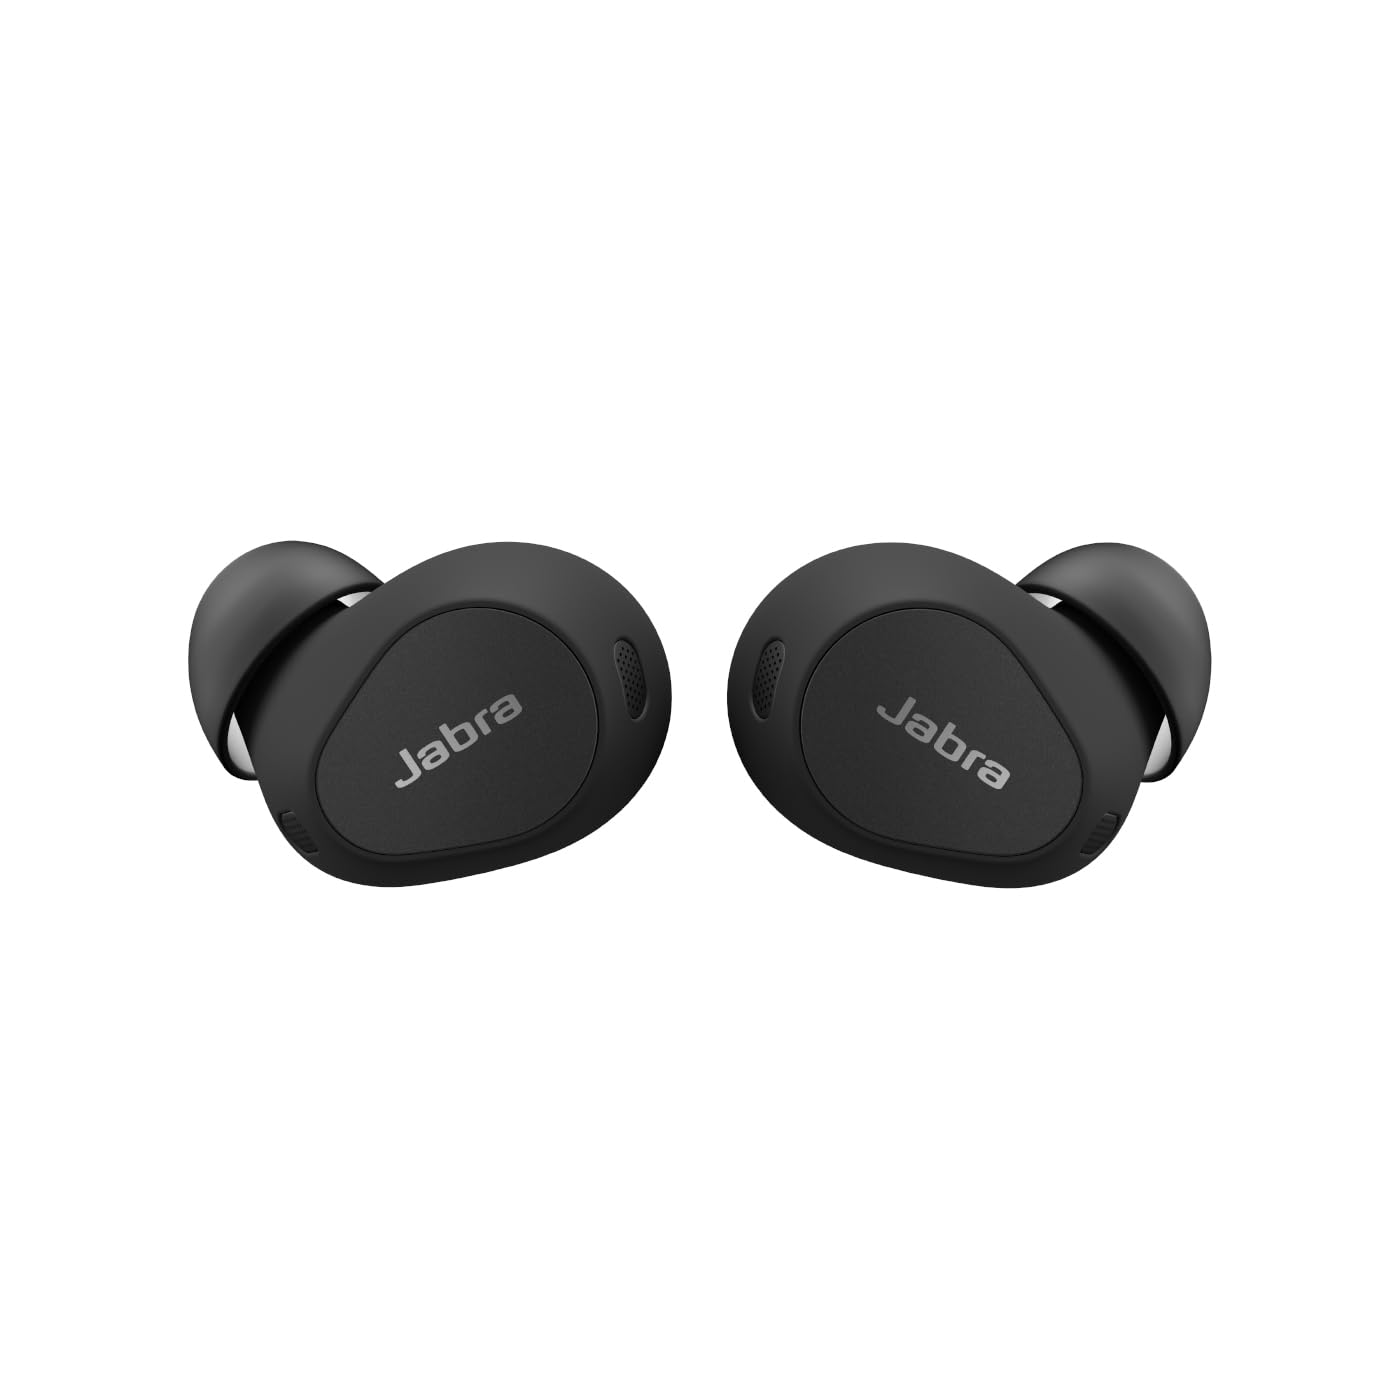 Jabra Elite 10 True Wireless Earbuds – Advanced Active Noise Cancelling Earbuds with Next-Level Dolby Atmos Surround Sound –All-Day Comfort, Multipoint Bluetooth, Wireless Charging – Matte Black